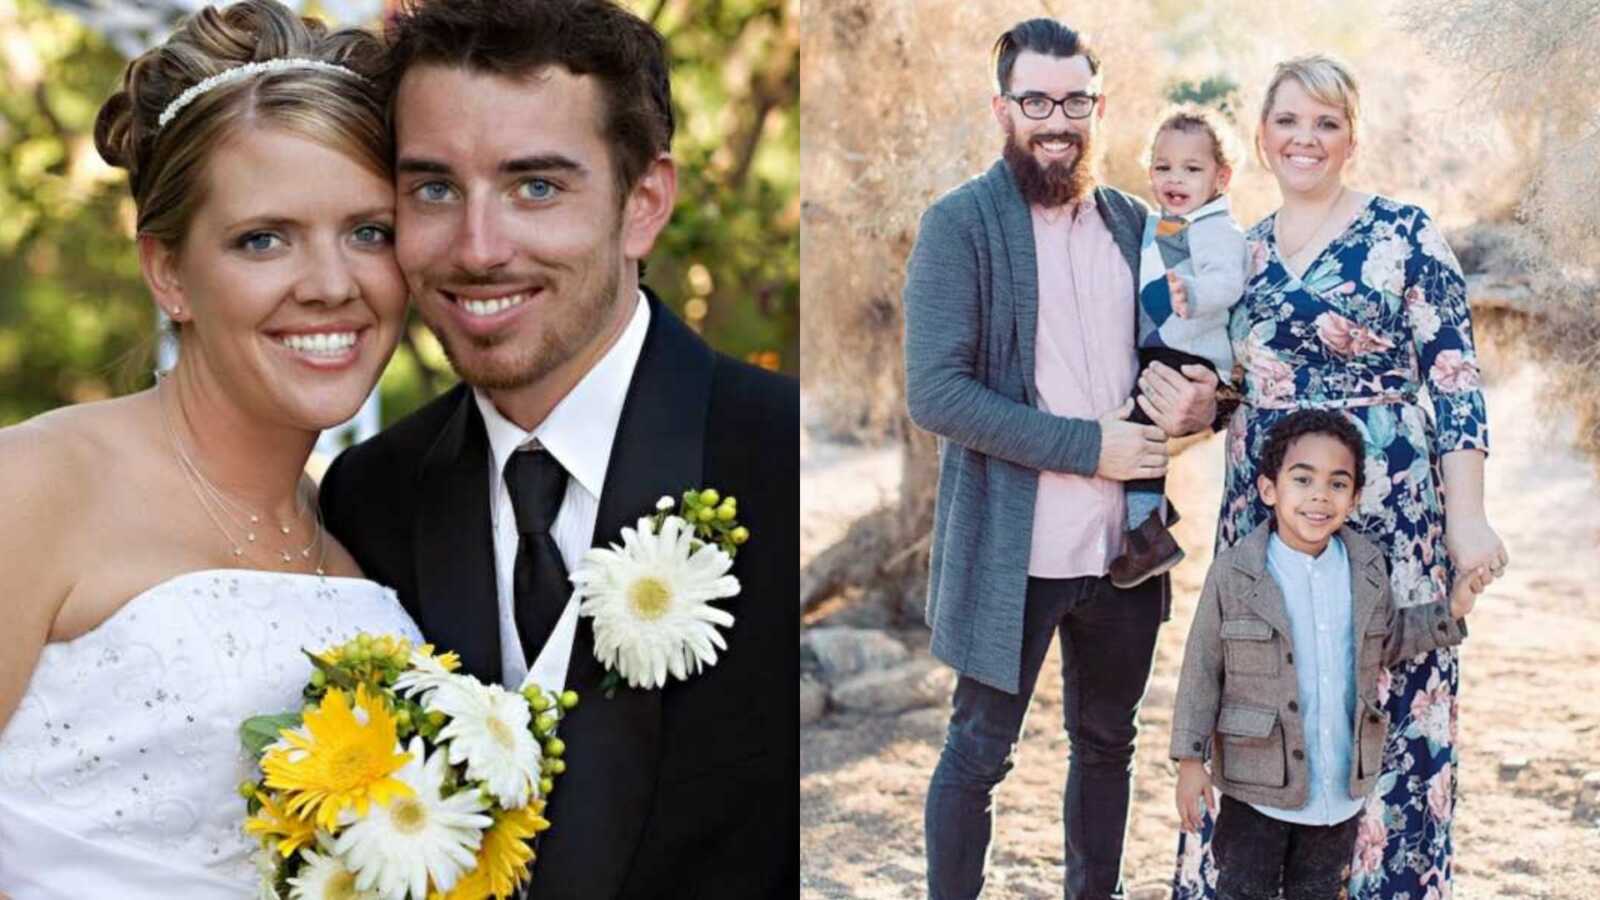 A young couple getting married and parents with their adoptive children